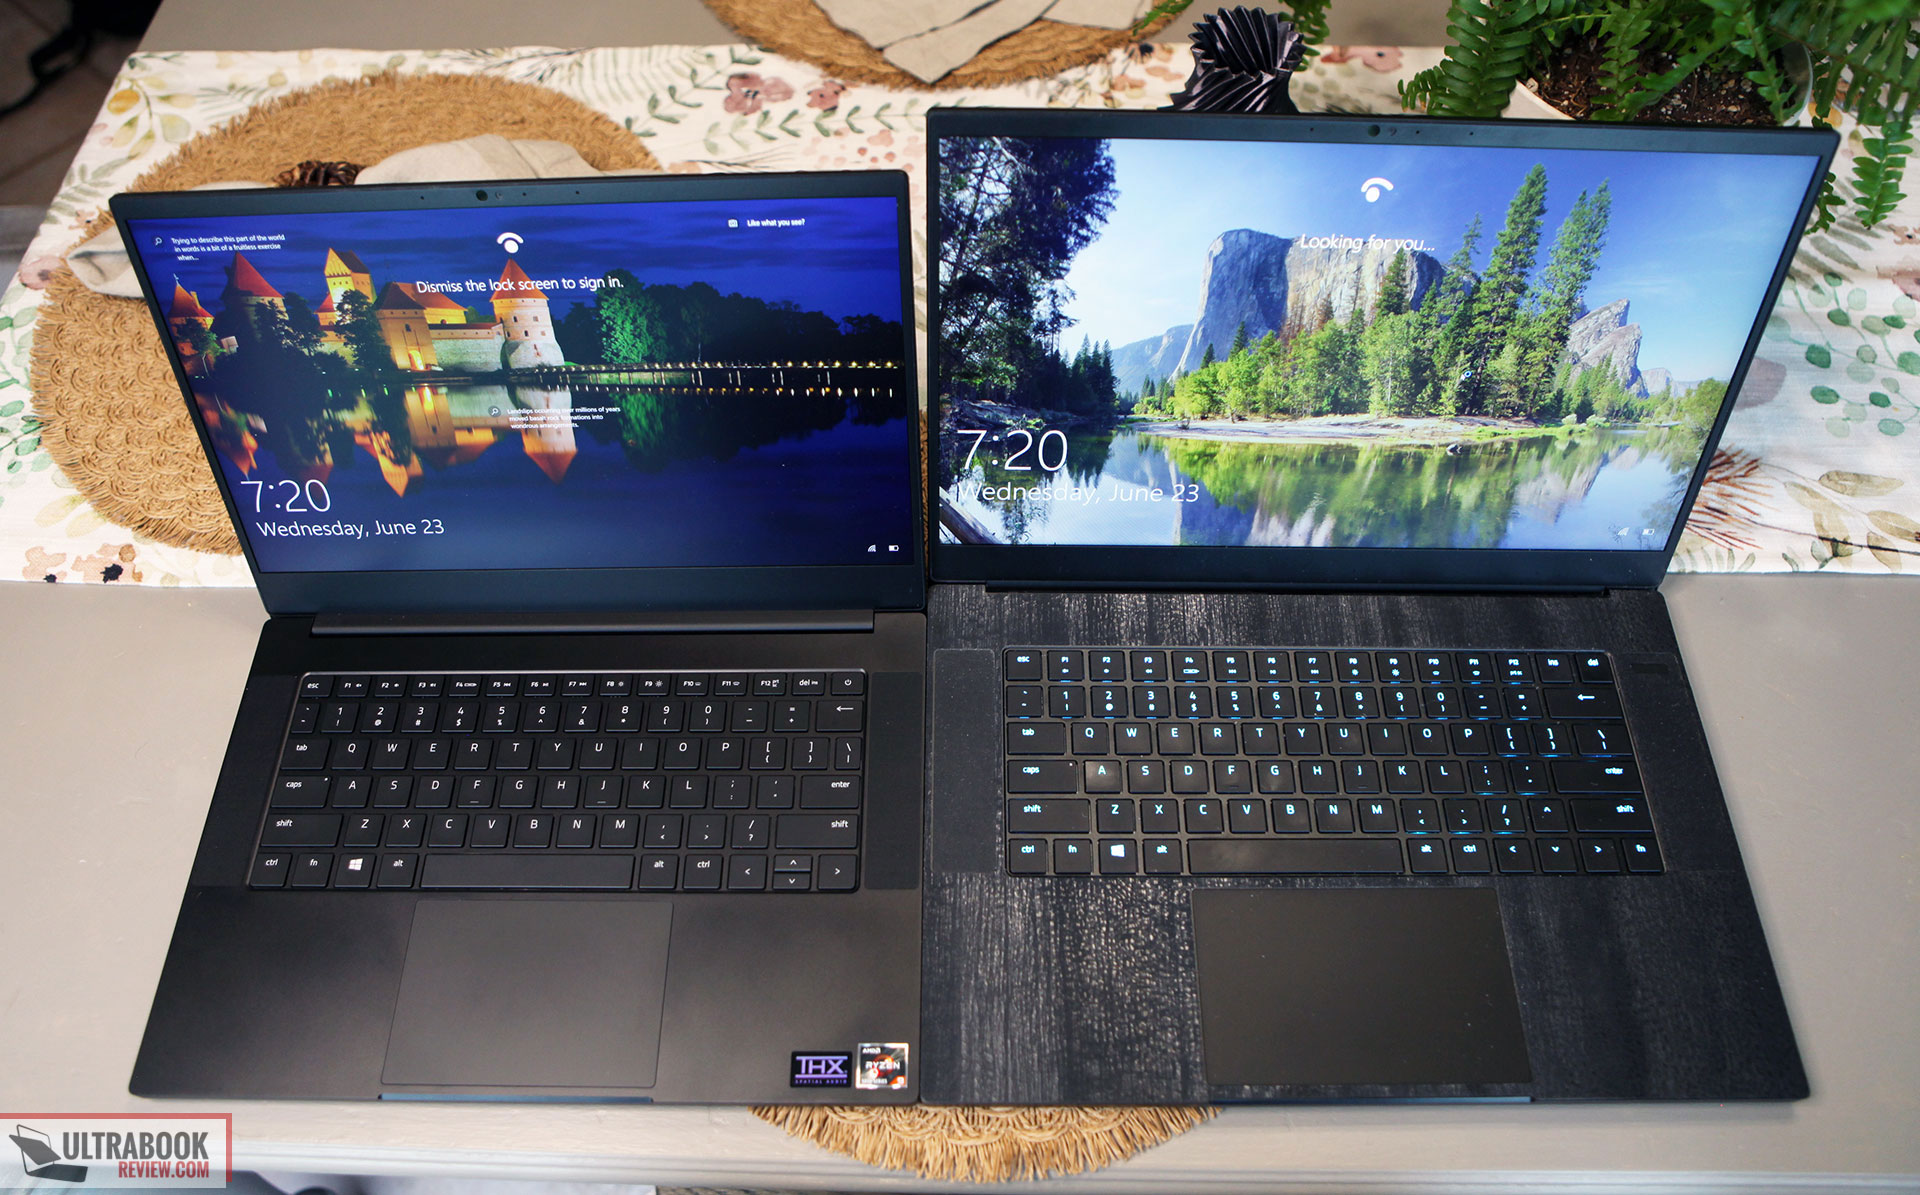 3 things when choosing between a 13 inch and a 15 inch laptop